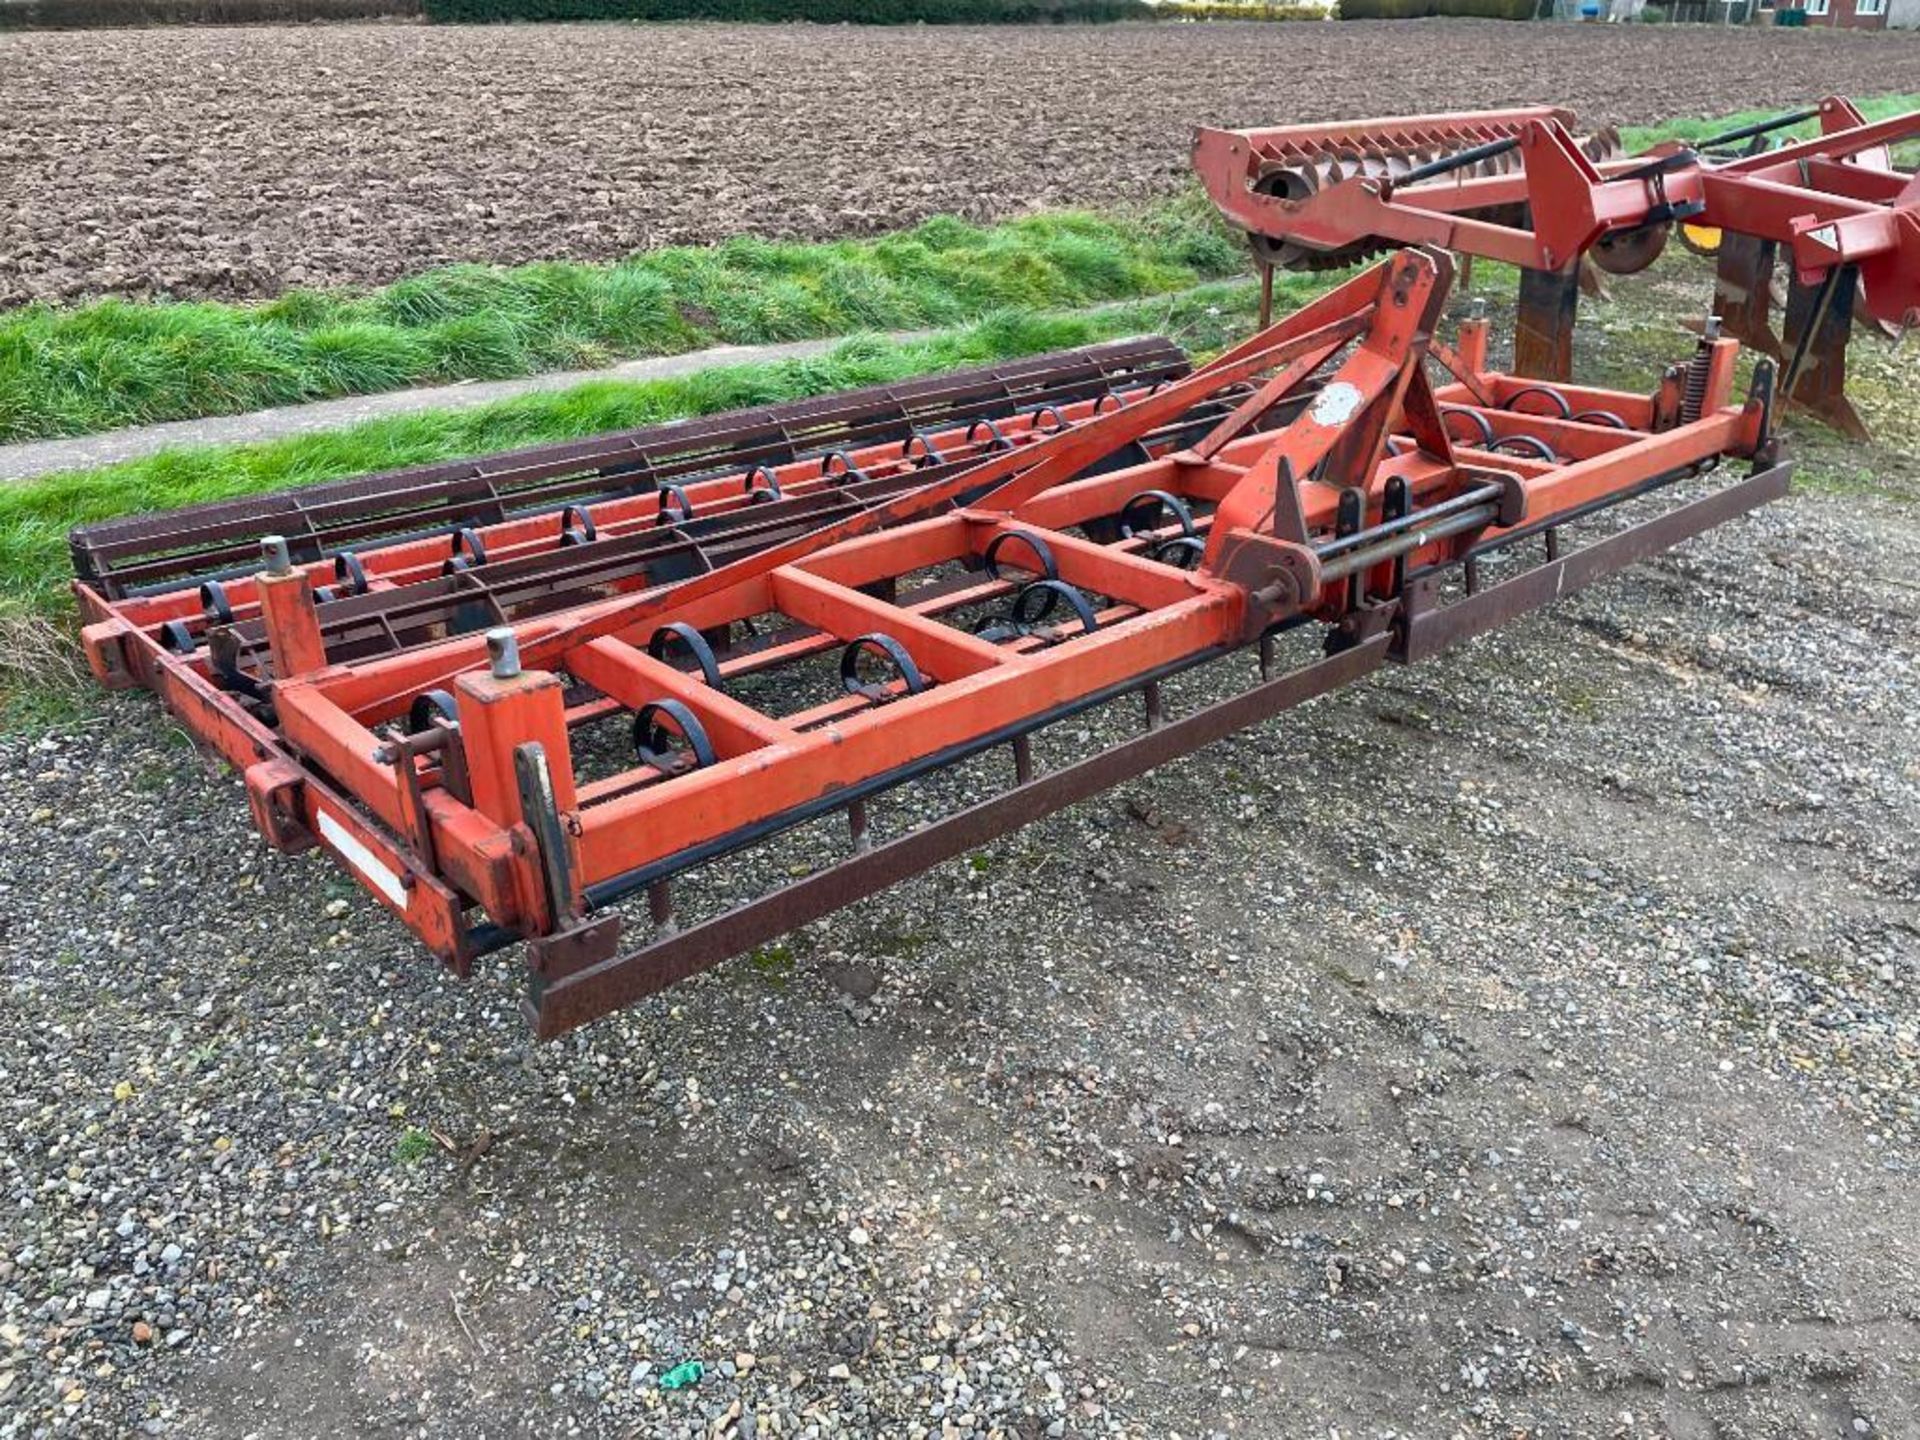 Kombi spring tine cultivator 4m with 2 crumbler rollers - Image 4 of 5